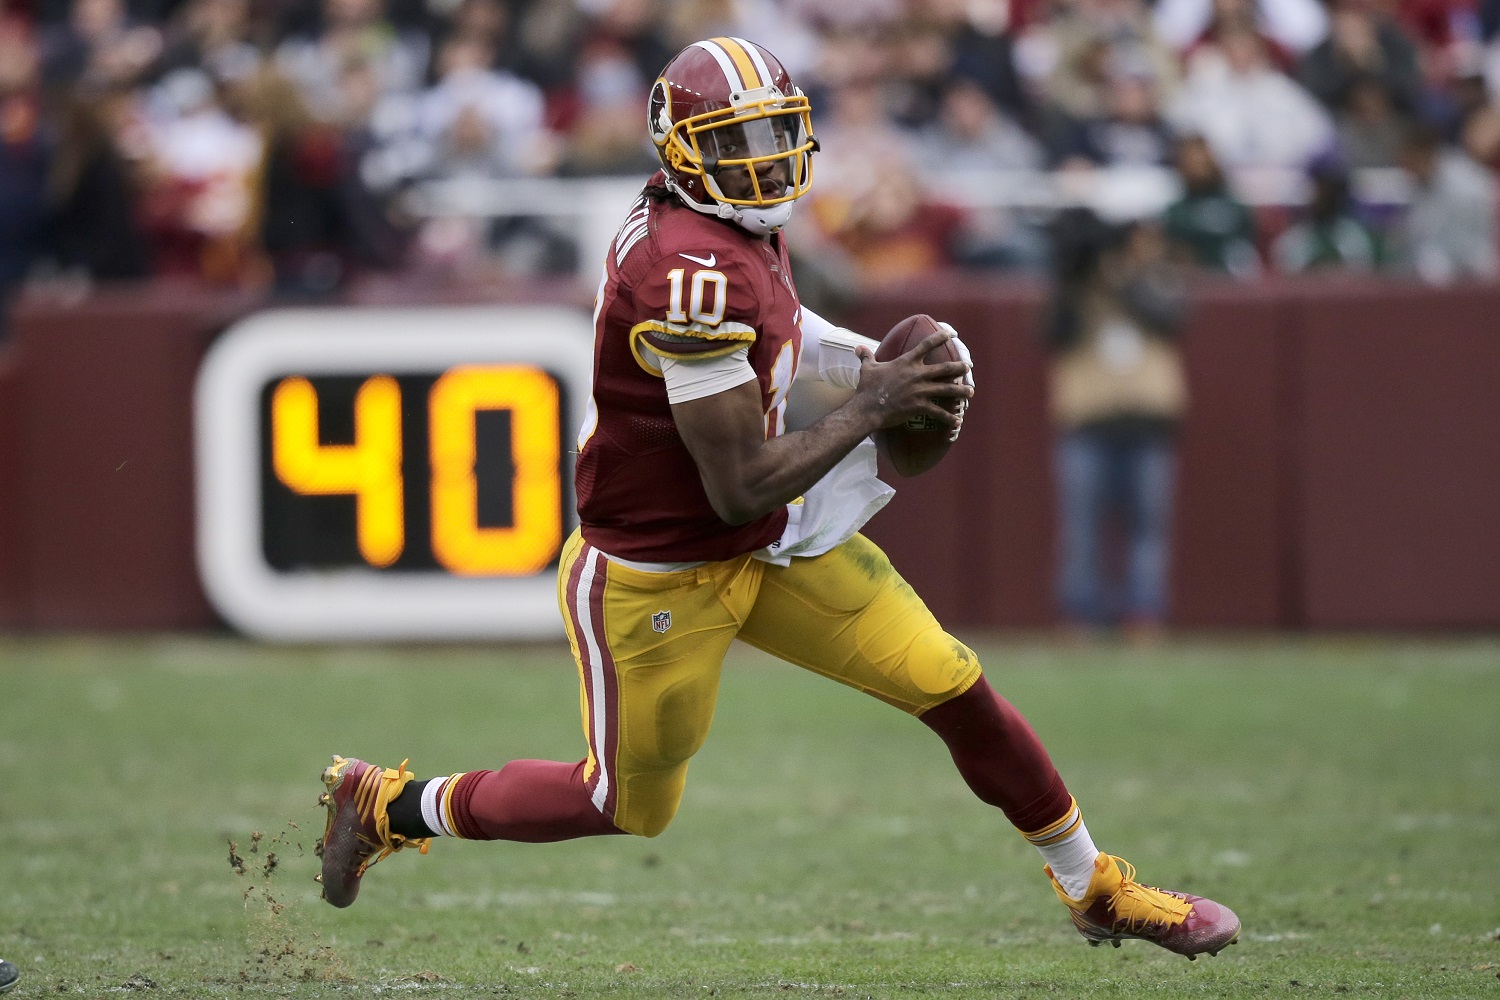 Washington Redskins quarterback Robert Griffin III (10) scrambles with the ball during the first half of an NFL football game against the Dallas Cowboys in Landover, Md., Sunday, Dec. 28, 2014. (AP Photo/Mark Tenally)